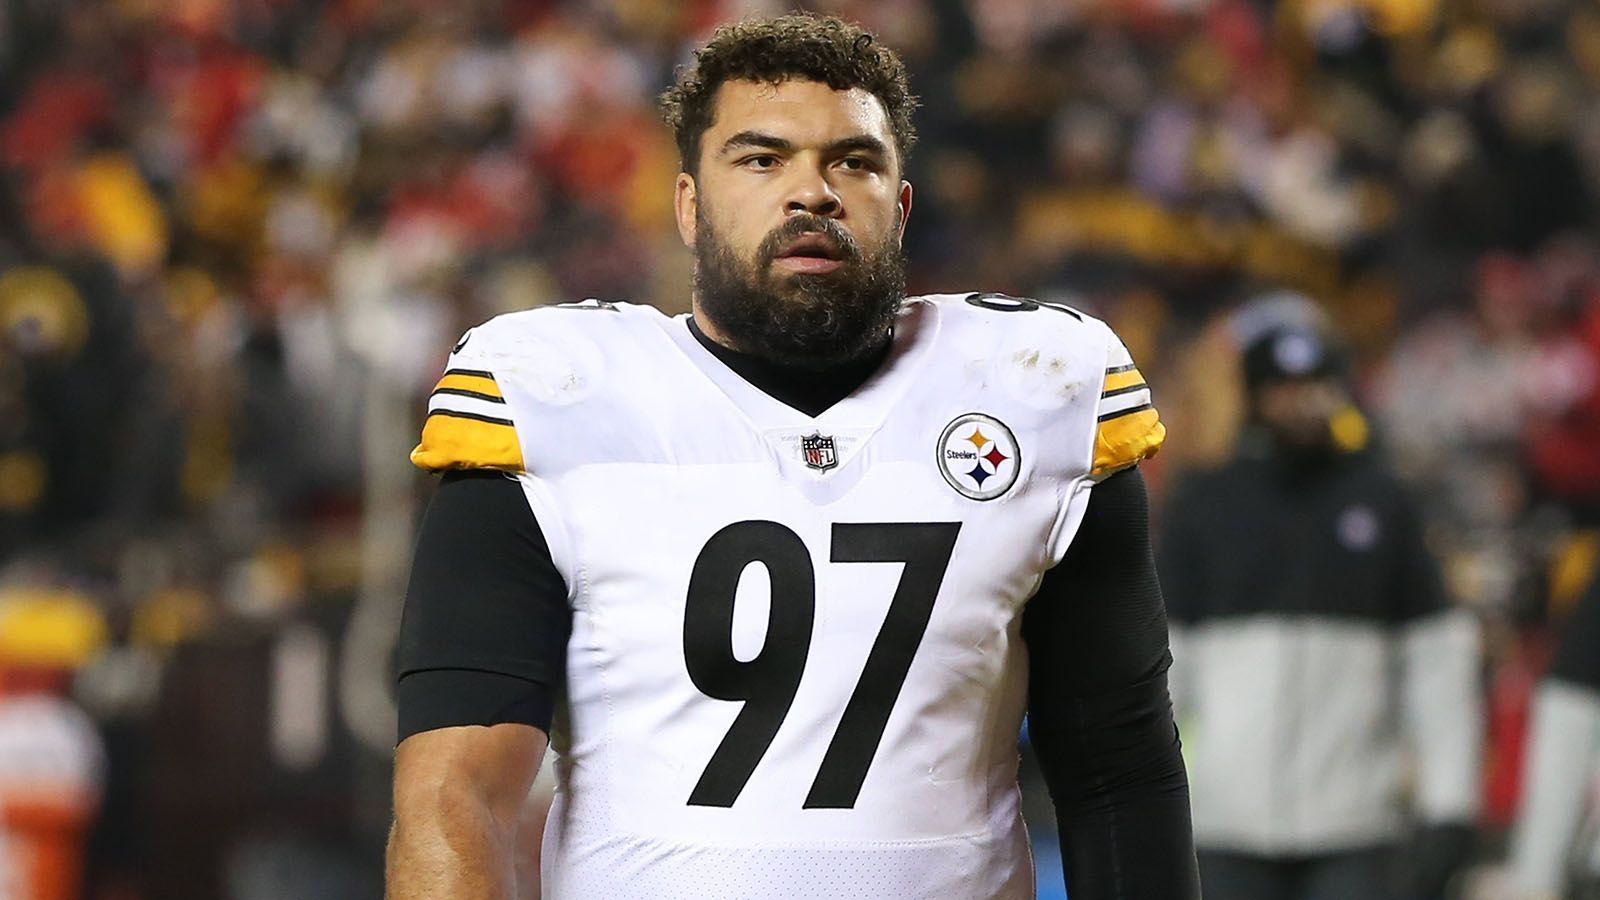 
                <strong>2. Platz (geteilt): Cameron Heyward</strong><br>
                &#x2022; Team: Pittsburgh Steelers<br>&#x2022; Position: Right Defensive End<br>&#x2022; <strong>Overall Rating: 93</strong><br>&#x2022; Key Stats: Speed: 71 - Strength: 94 - Awareness: 99<br>
              